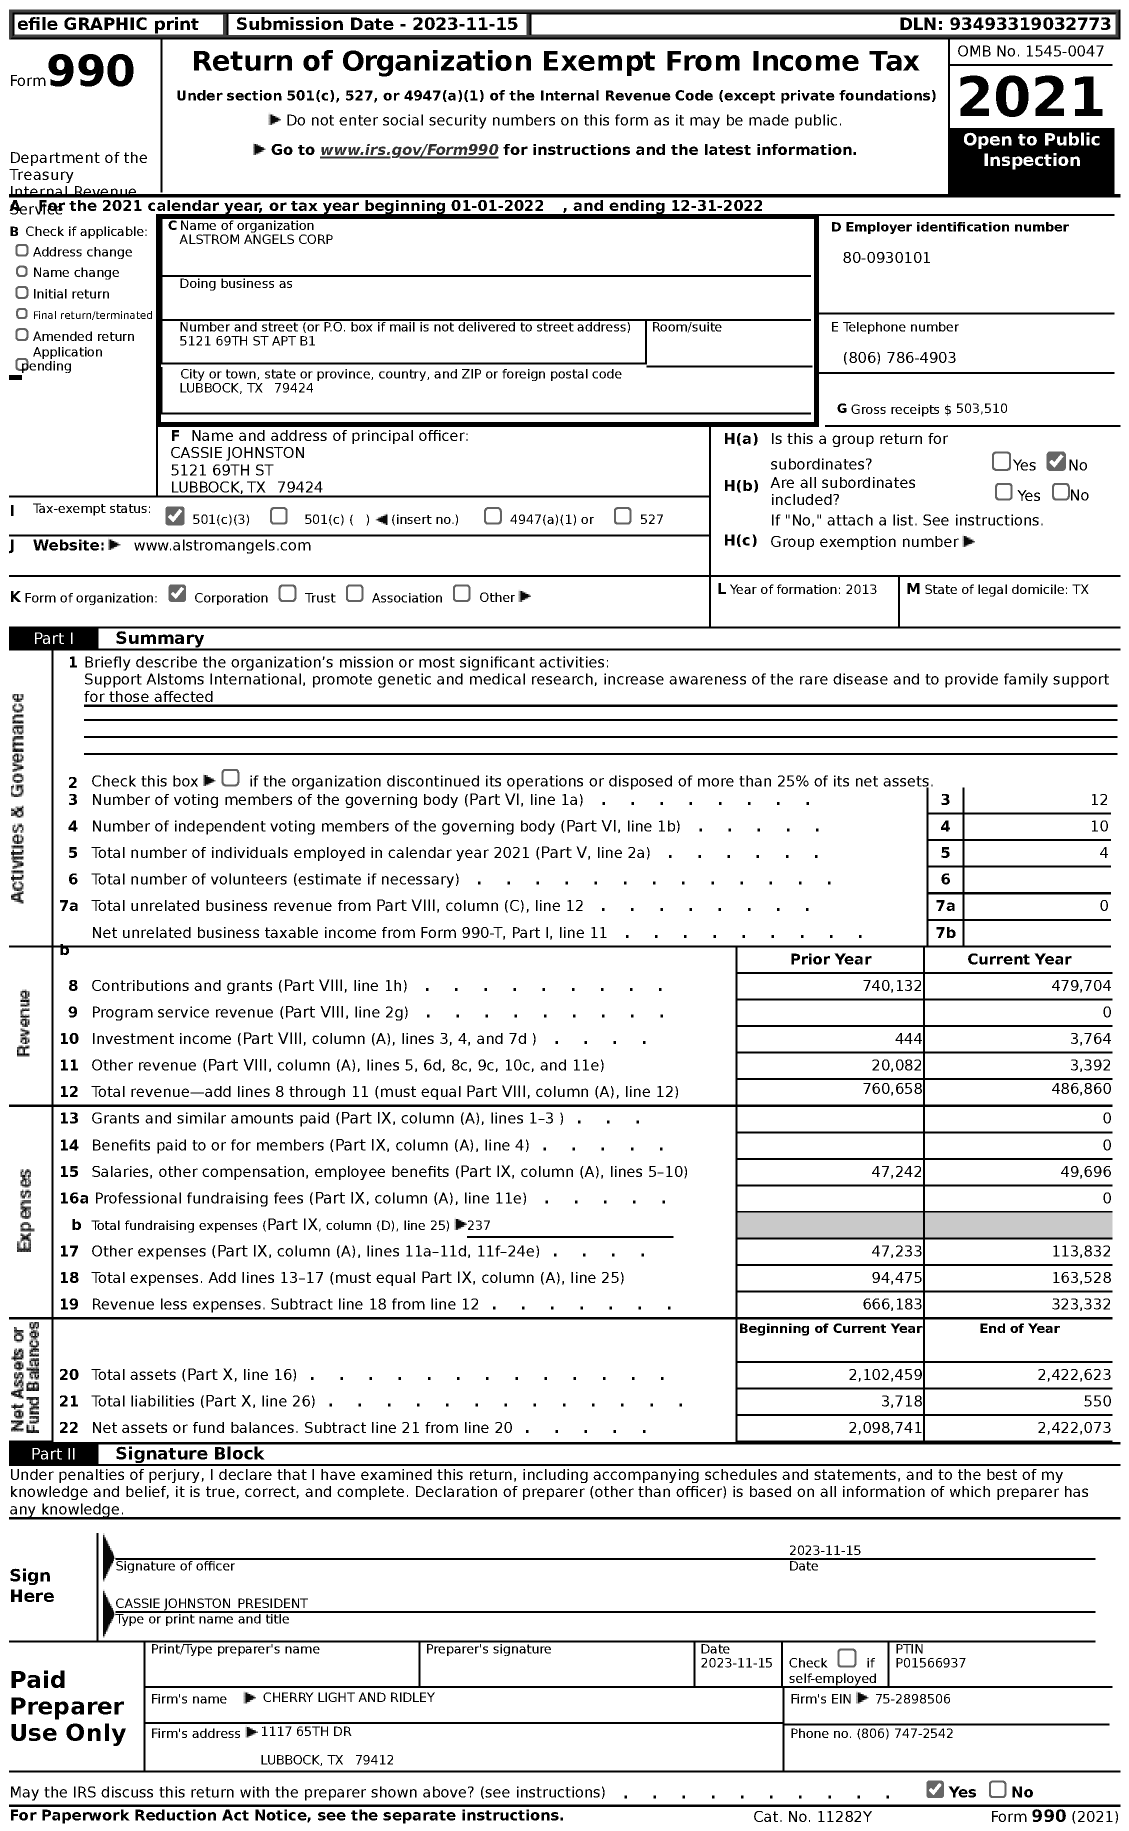 Image of first page of 2022 Form 990 for Alstrom Angels Corporation